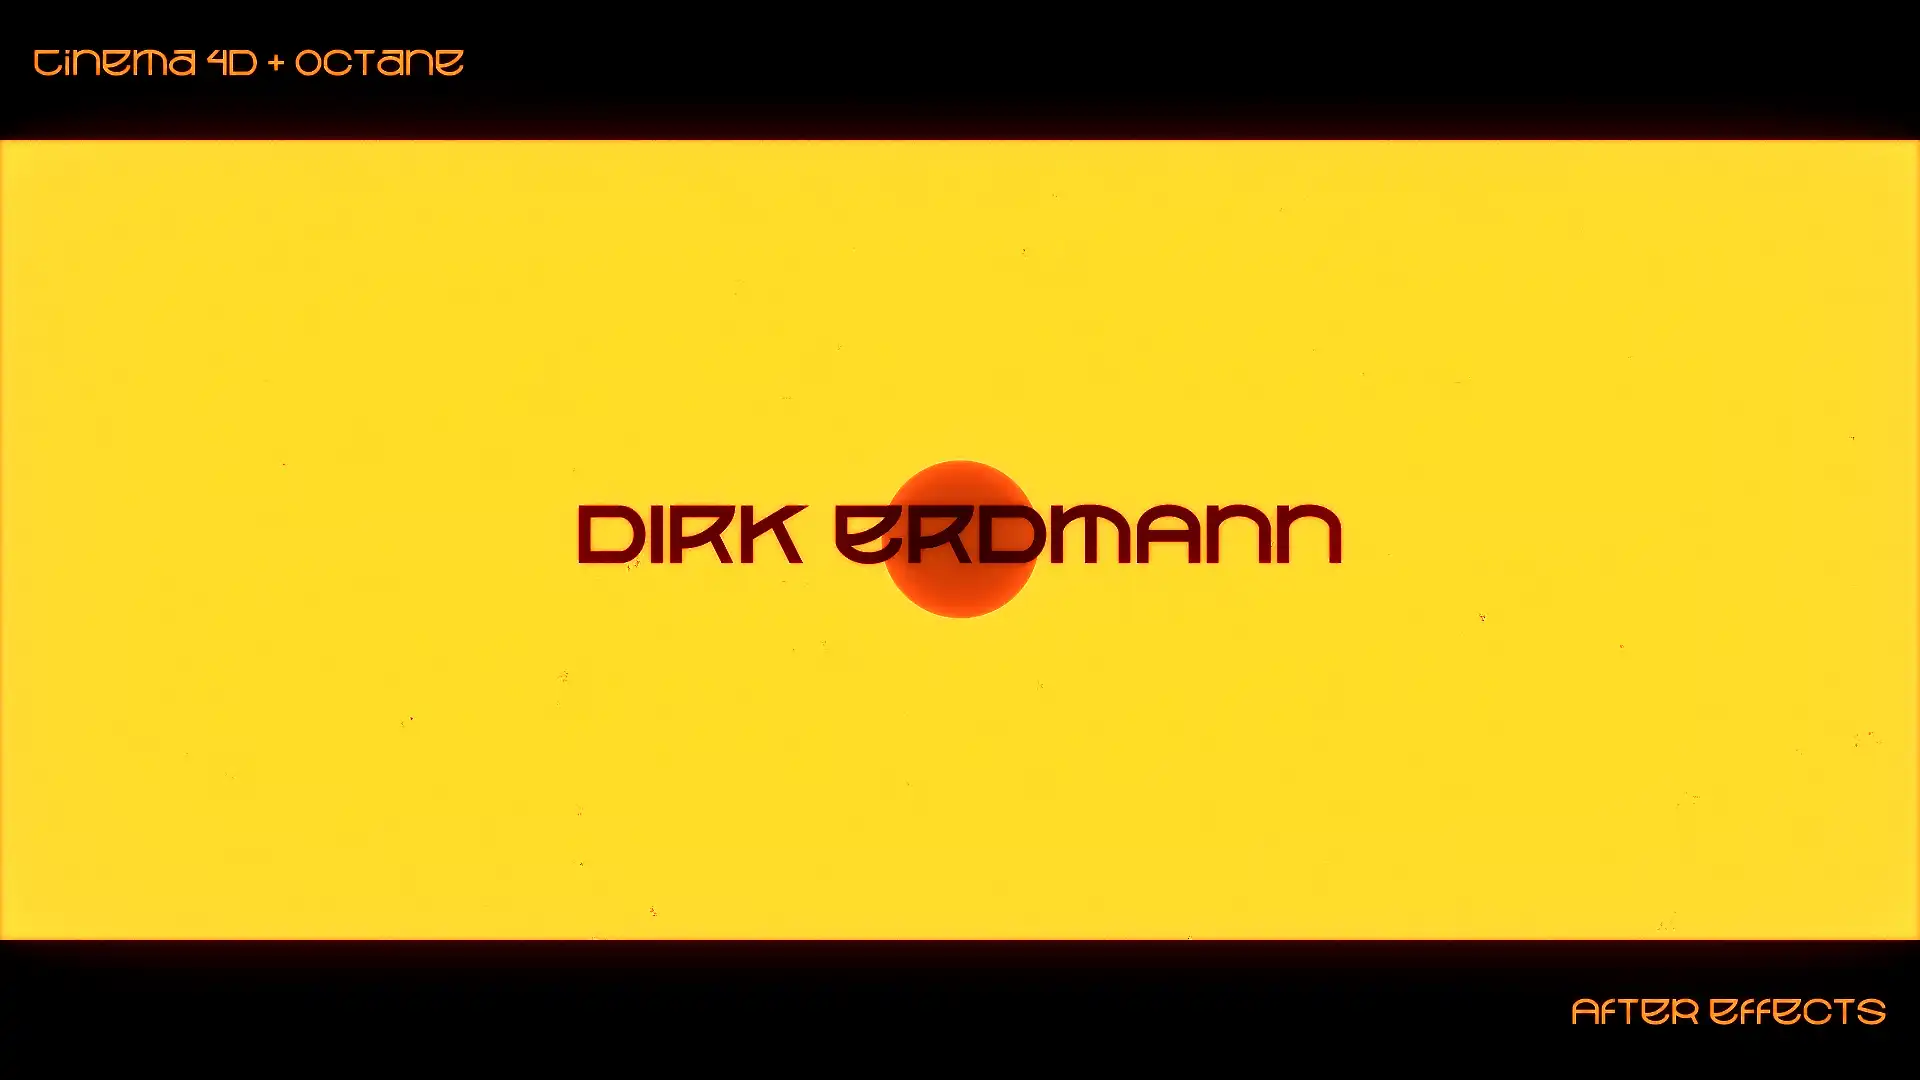 still image from the demo reel showing the title card. The background is a vibrant yellow with a orange circle in the middle of it. It has a text saying 'Dirk Erdmann' in the middle. It is grainy and has a cinematic letterbox making it 21:9 aspect ratio. 